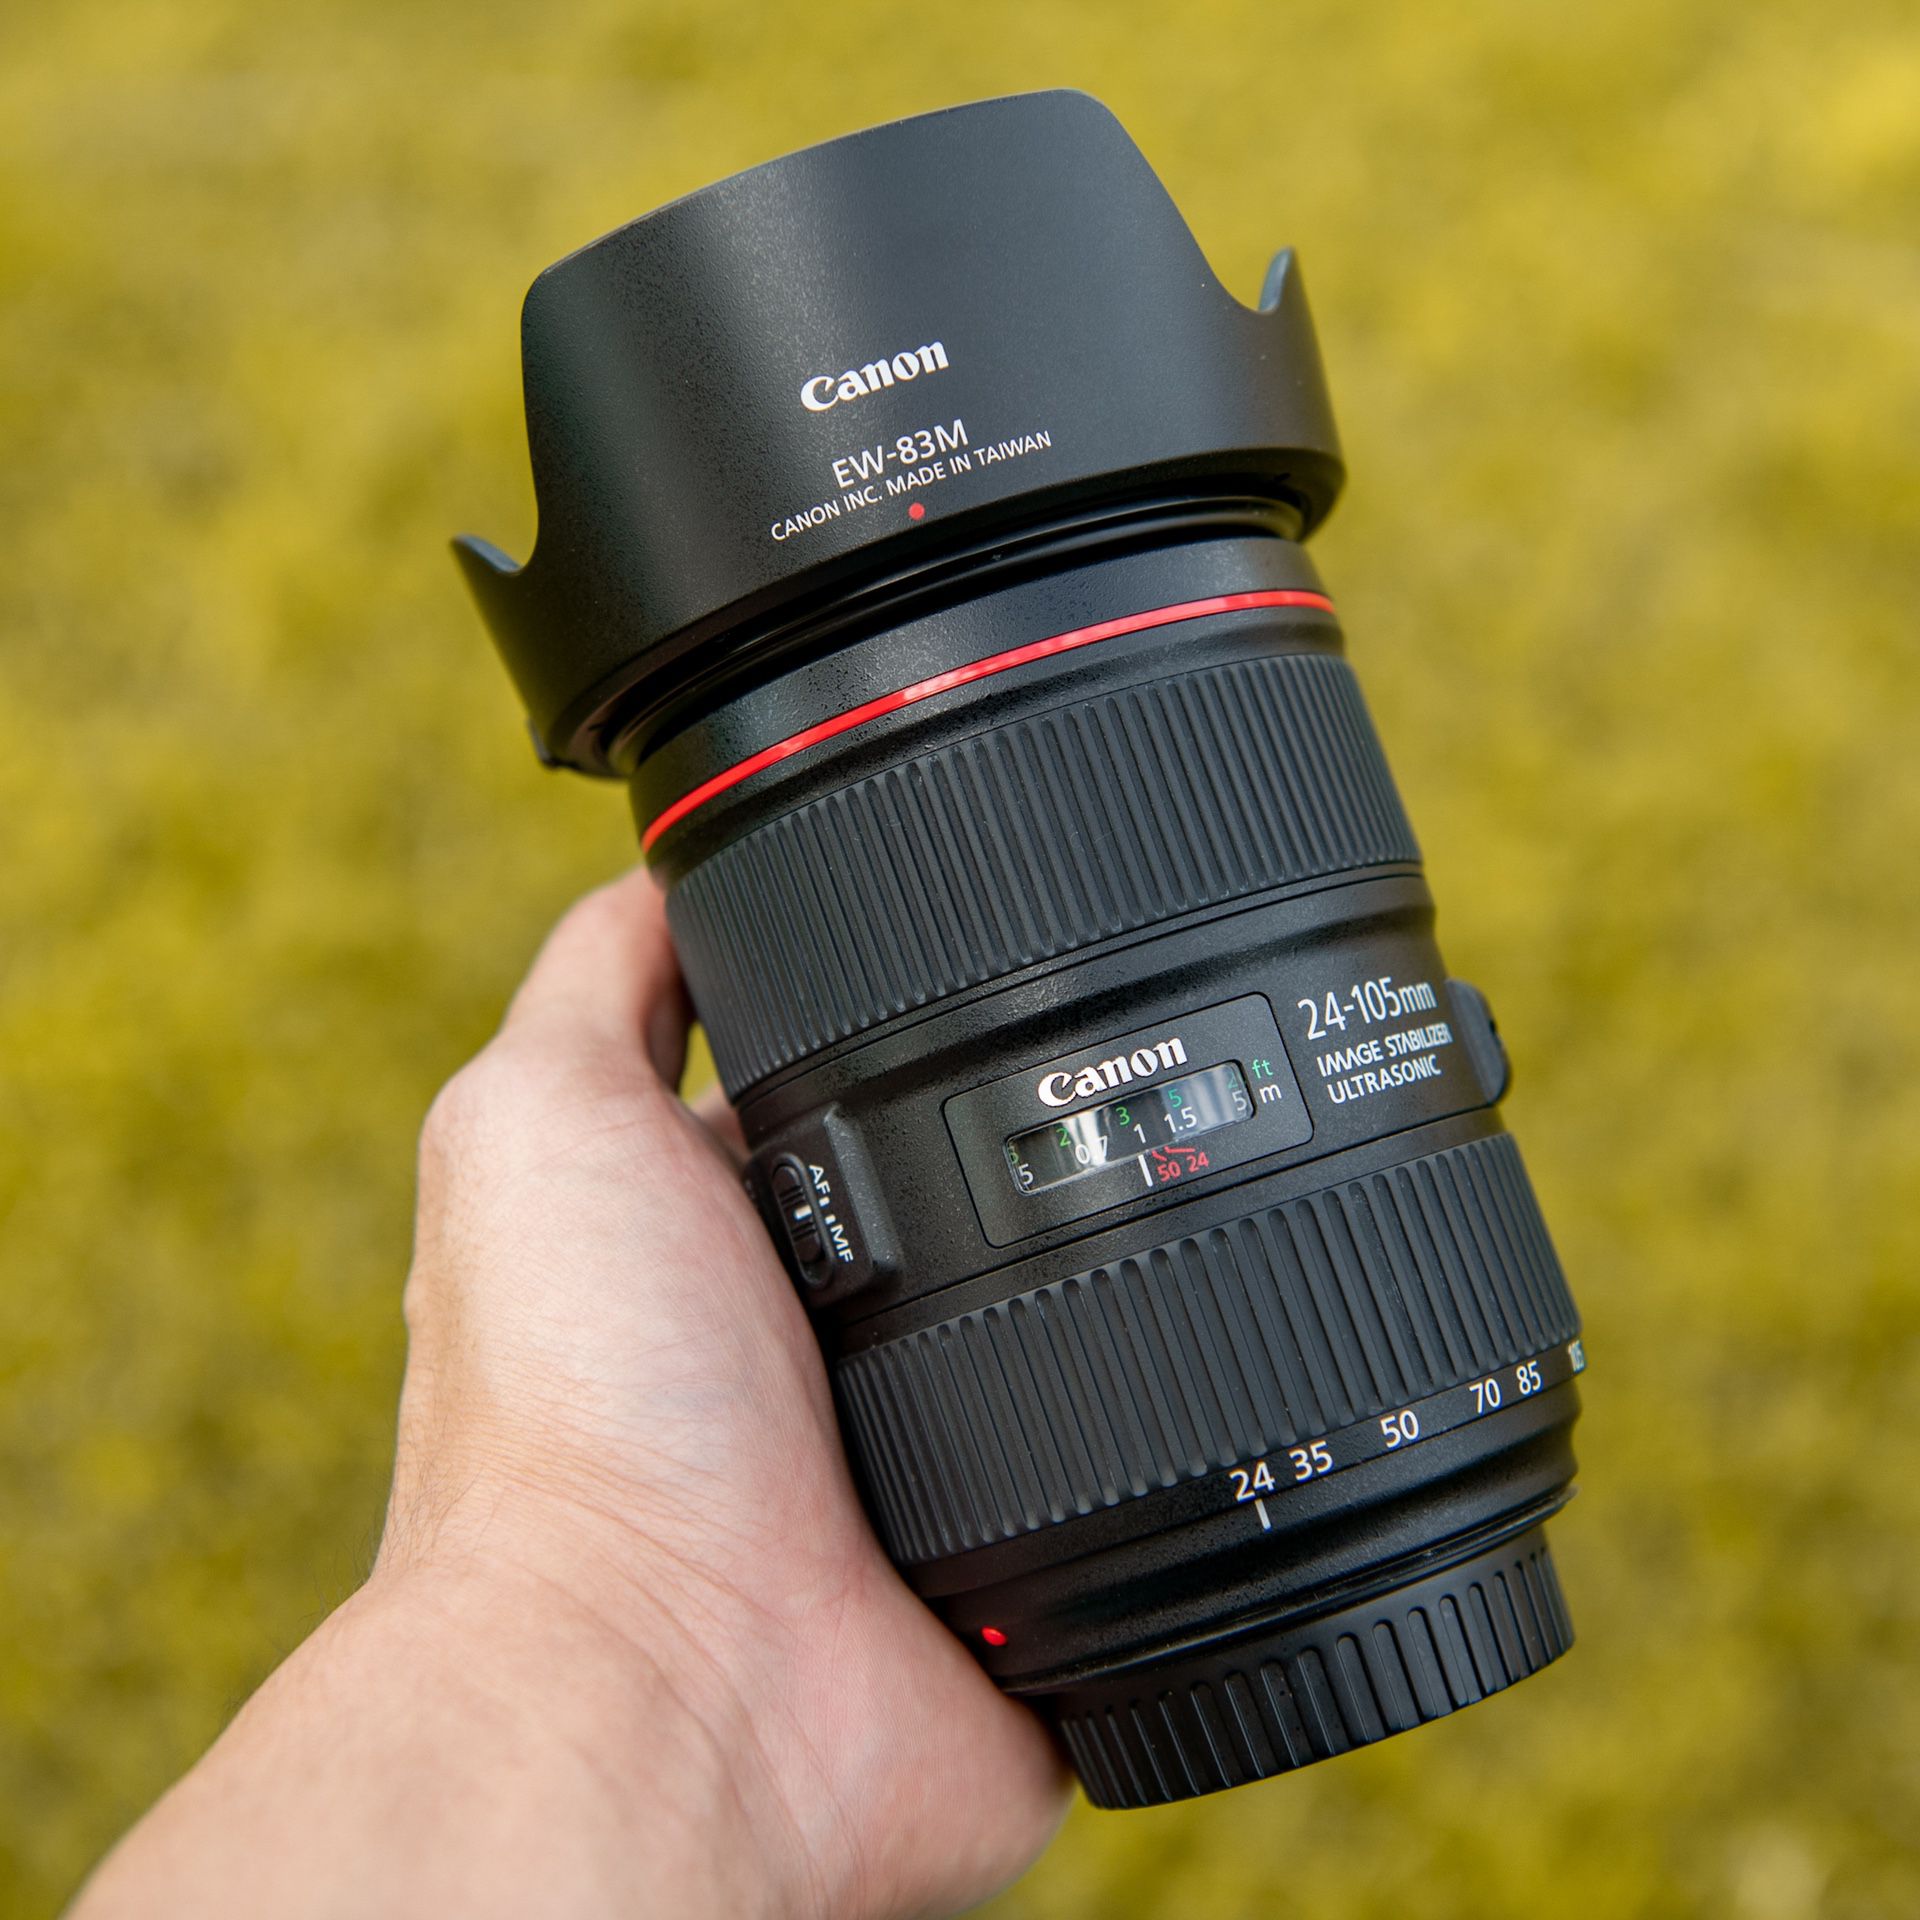 Canon 24-105mm f4 L II IS USM lens